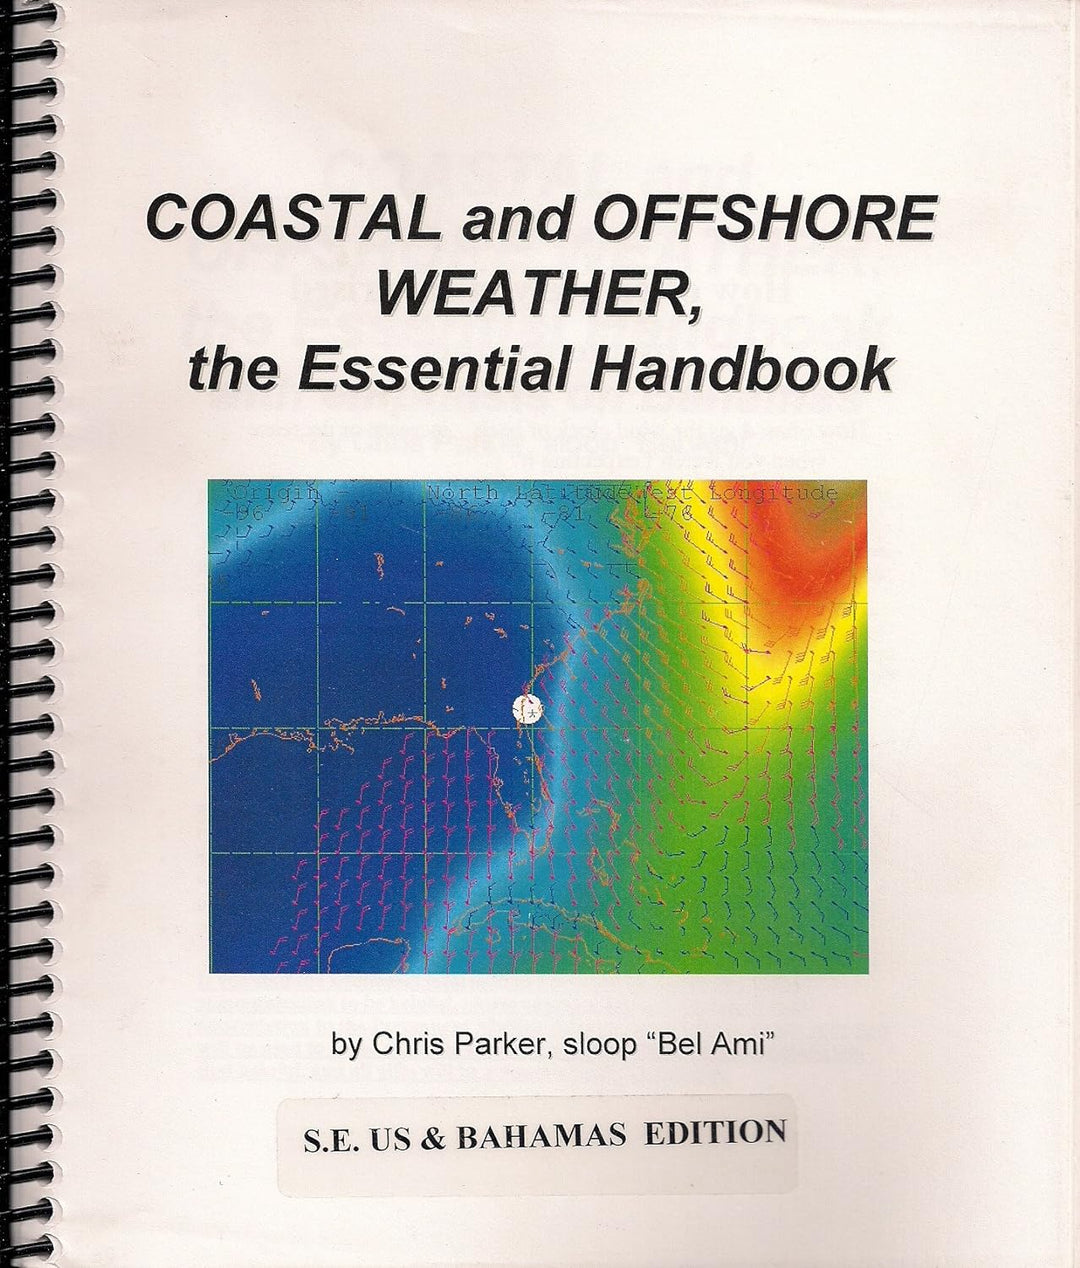 Coastal and Offshore Weather: The Essential Handbook